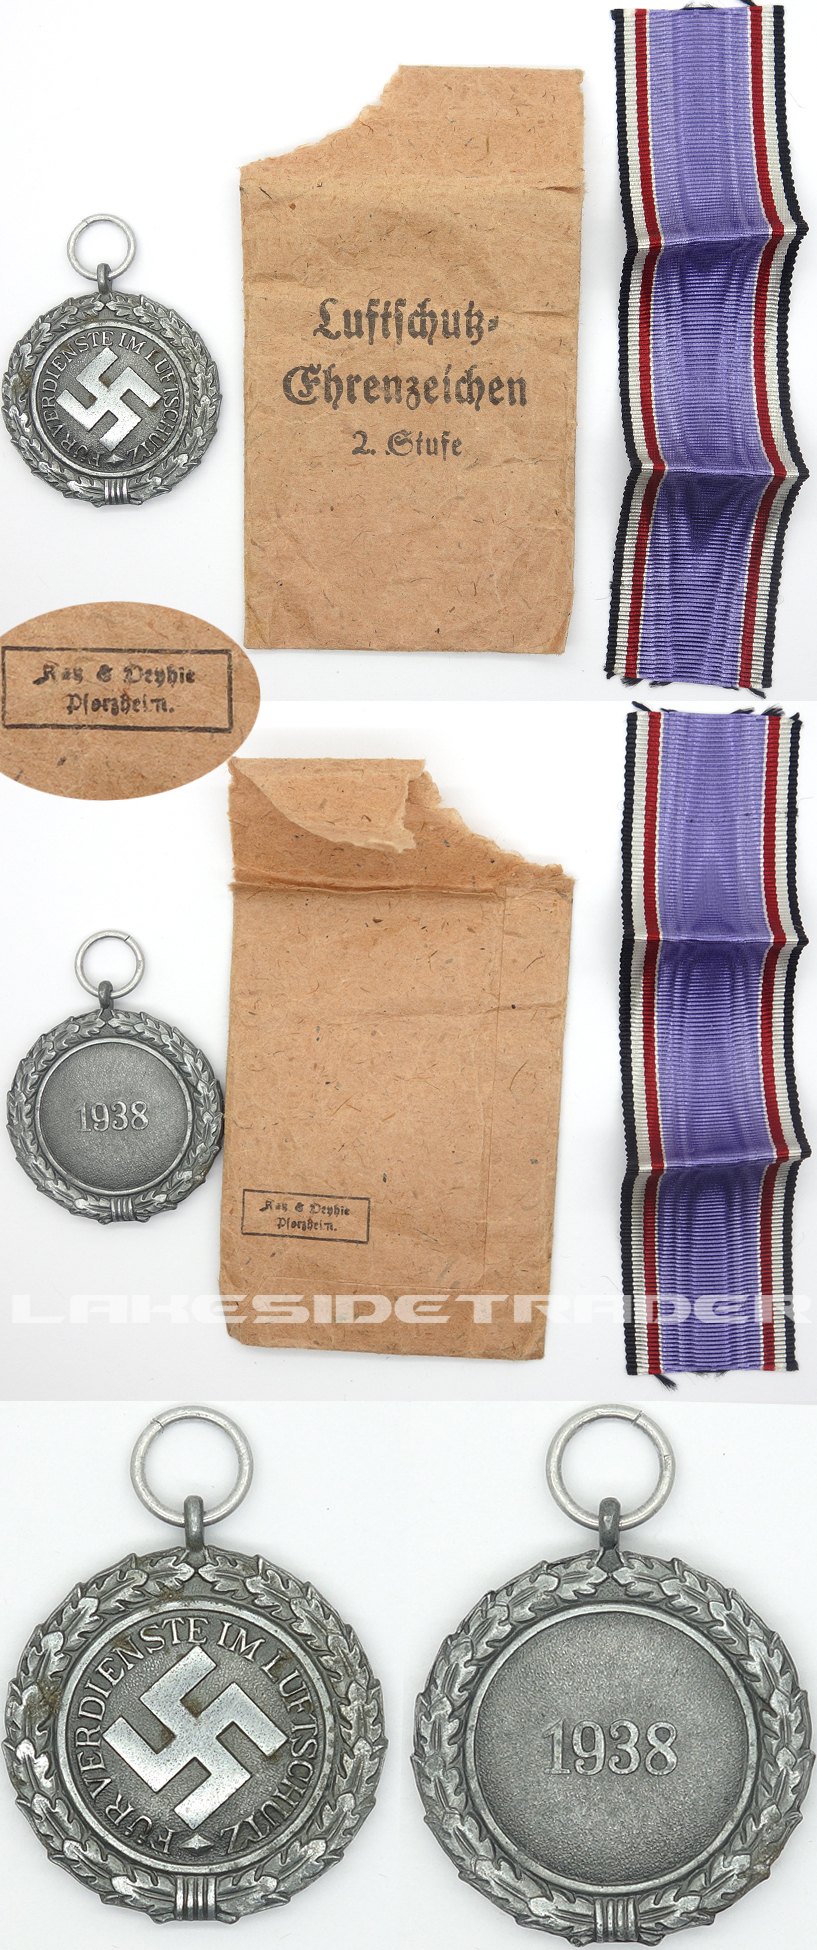 2nd Class Luftshutz Medal with issue packet.